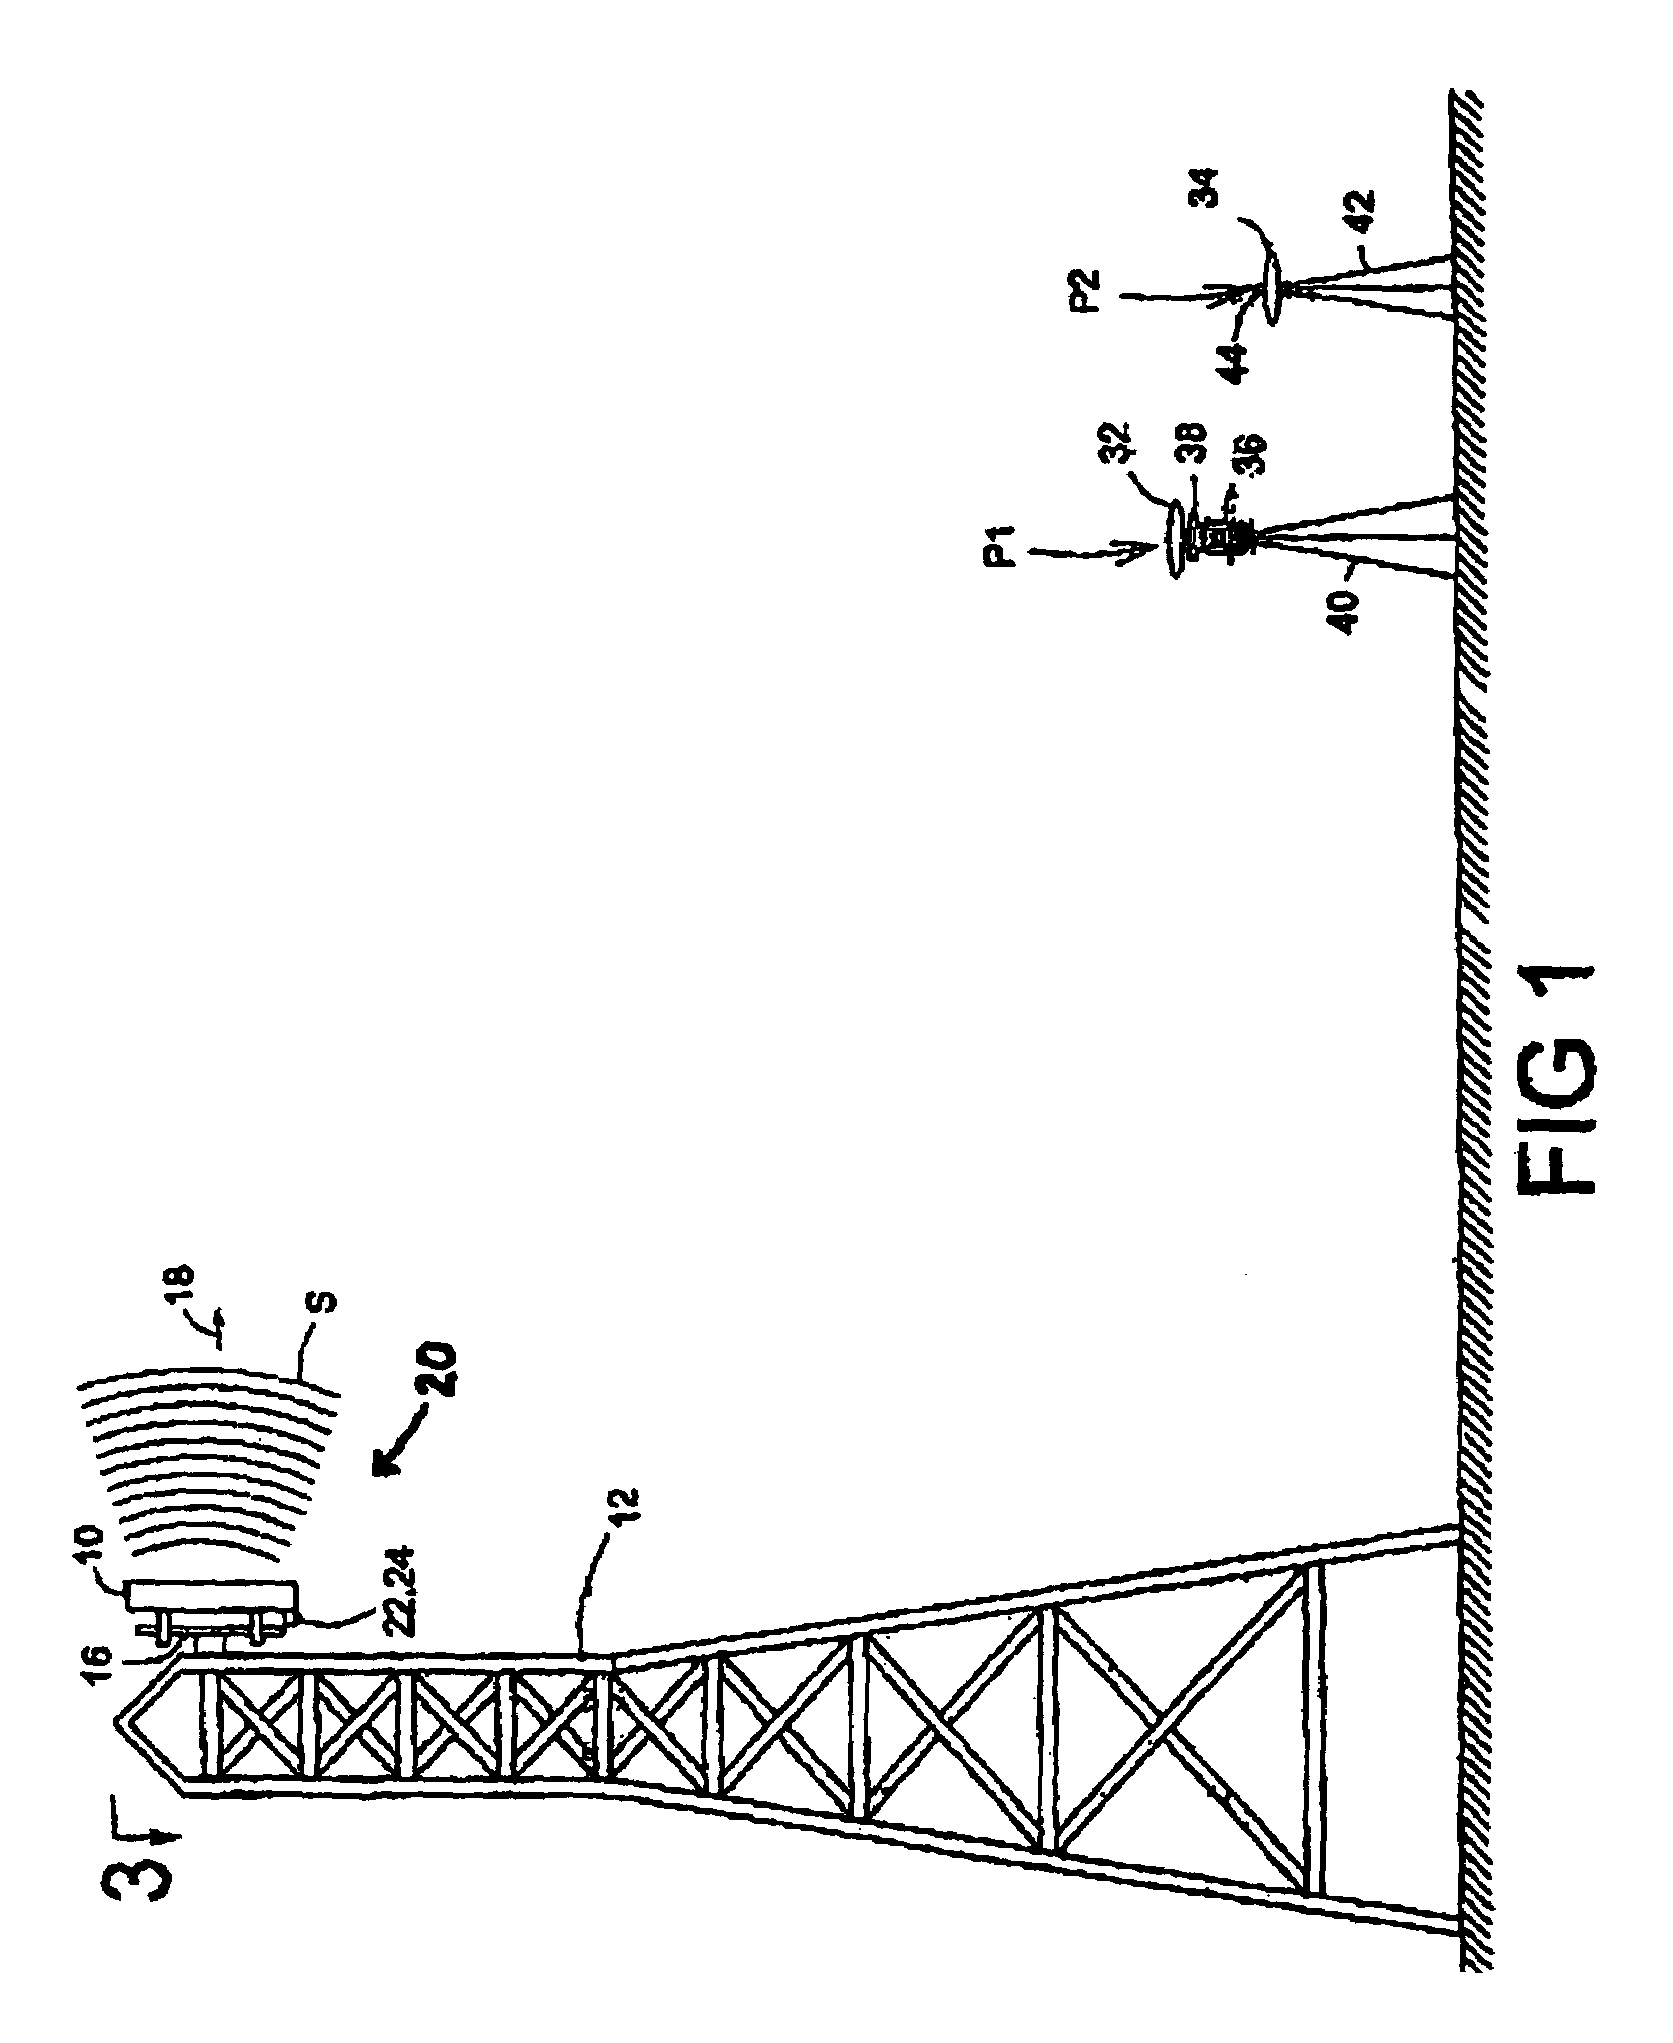 Antenna alignment system and method